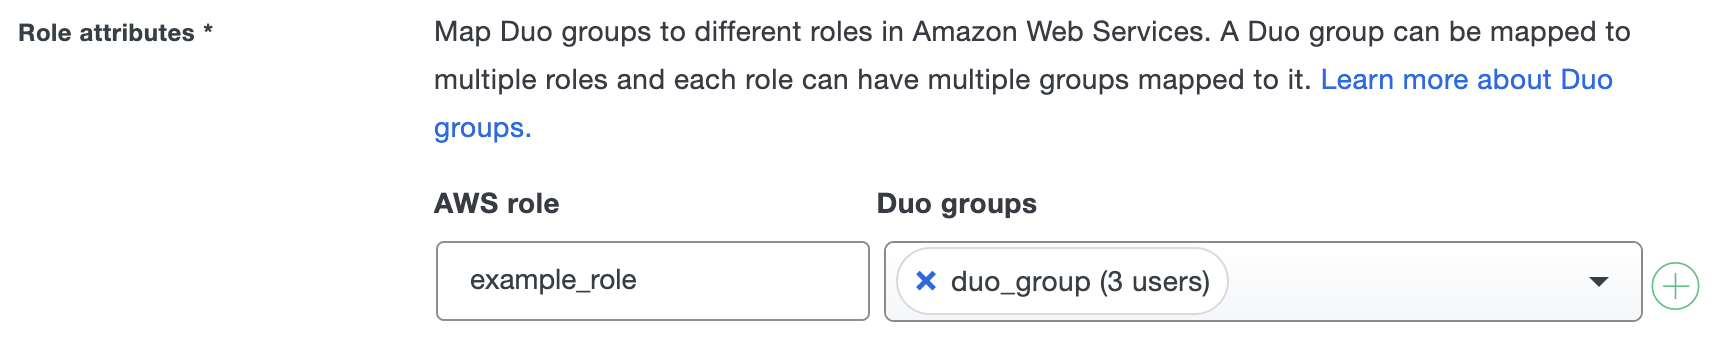 Duo Amazon WorkSpaces Role Attributes